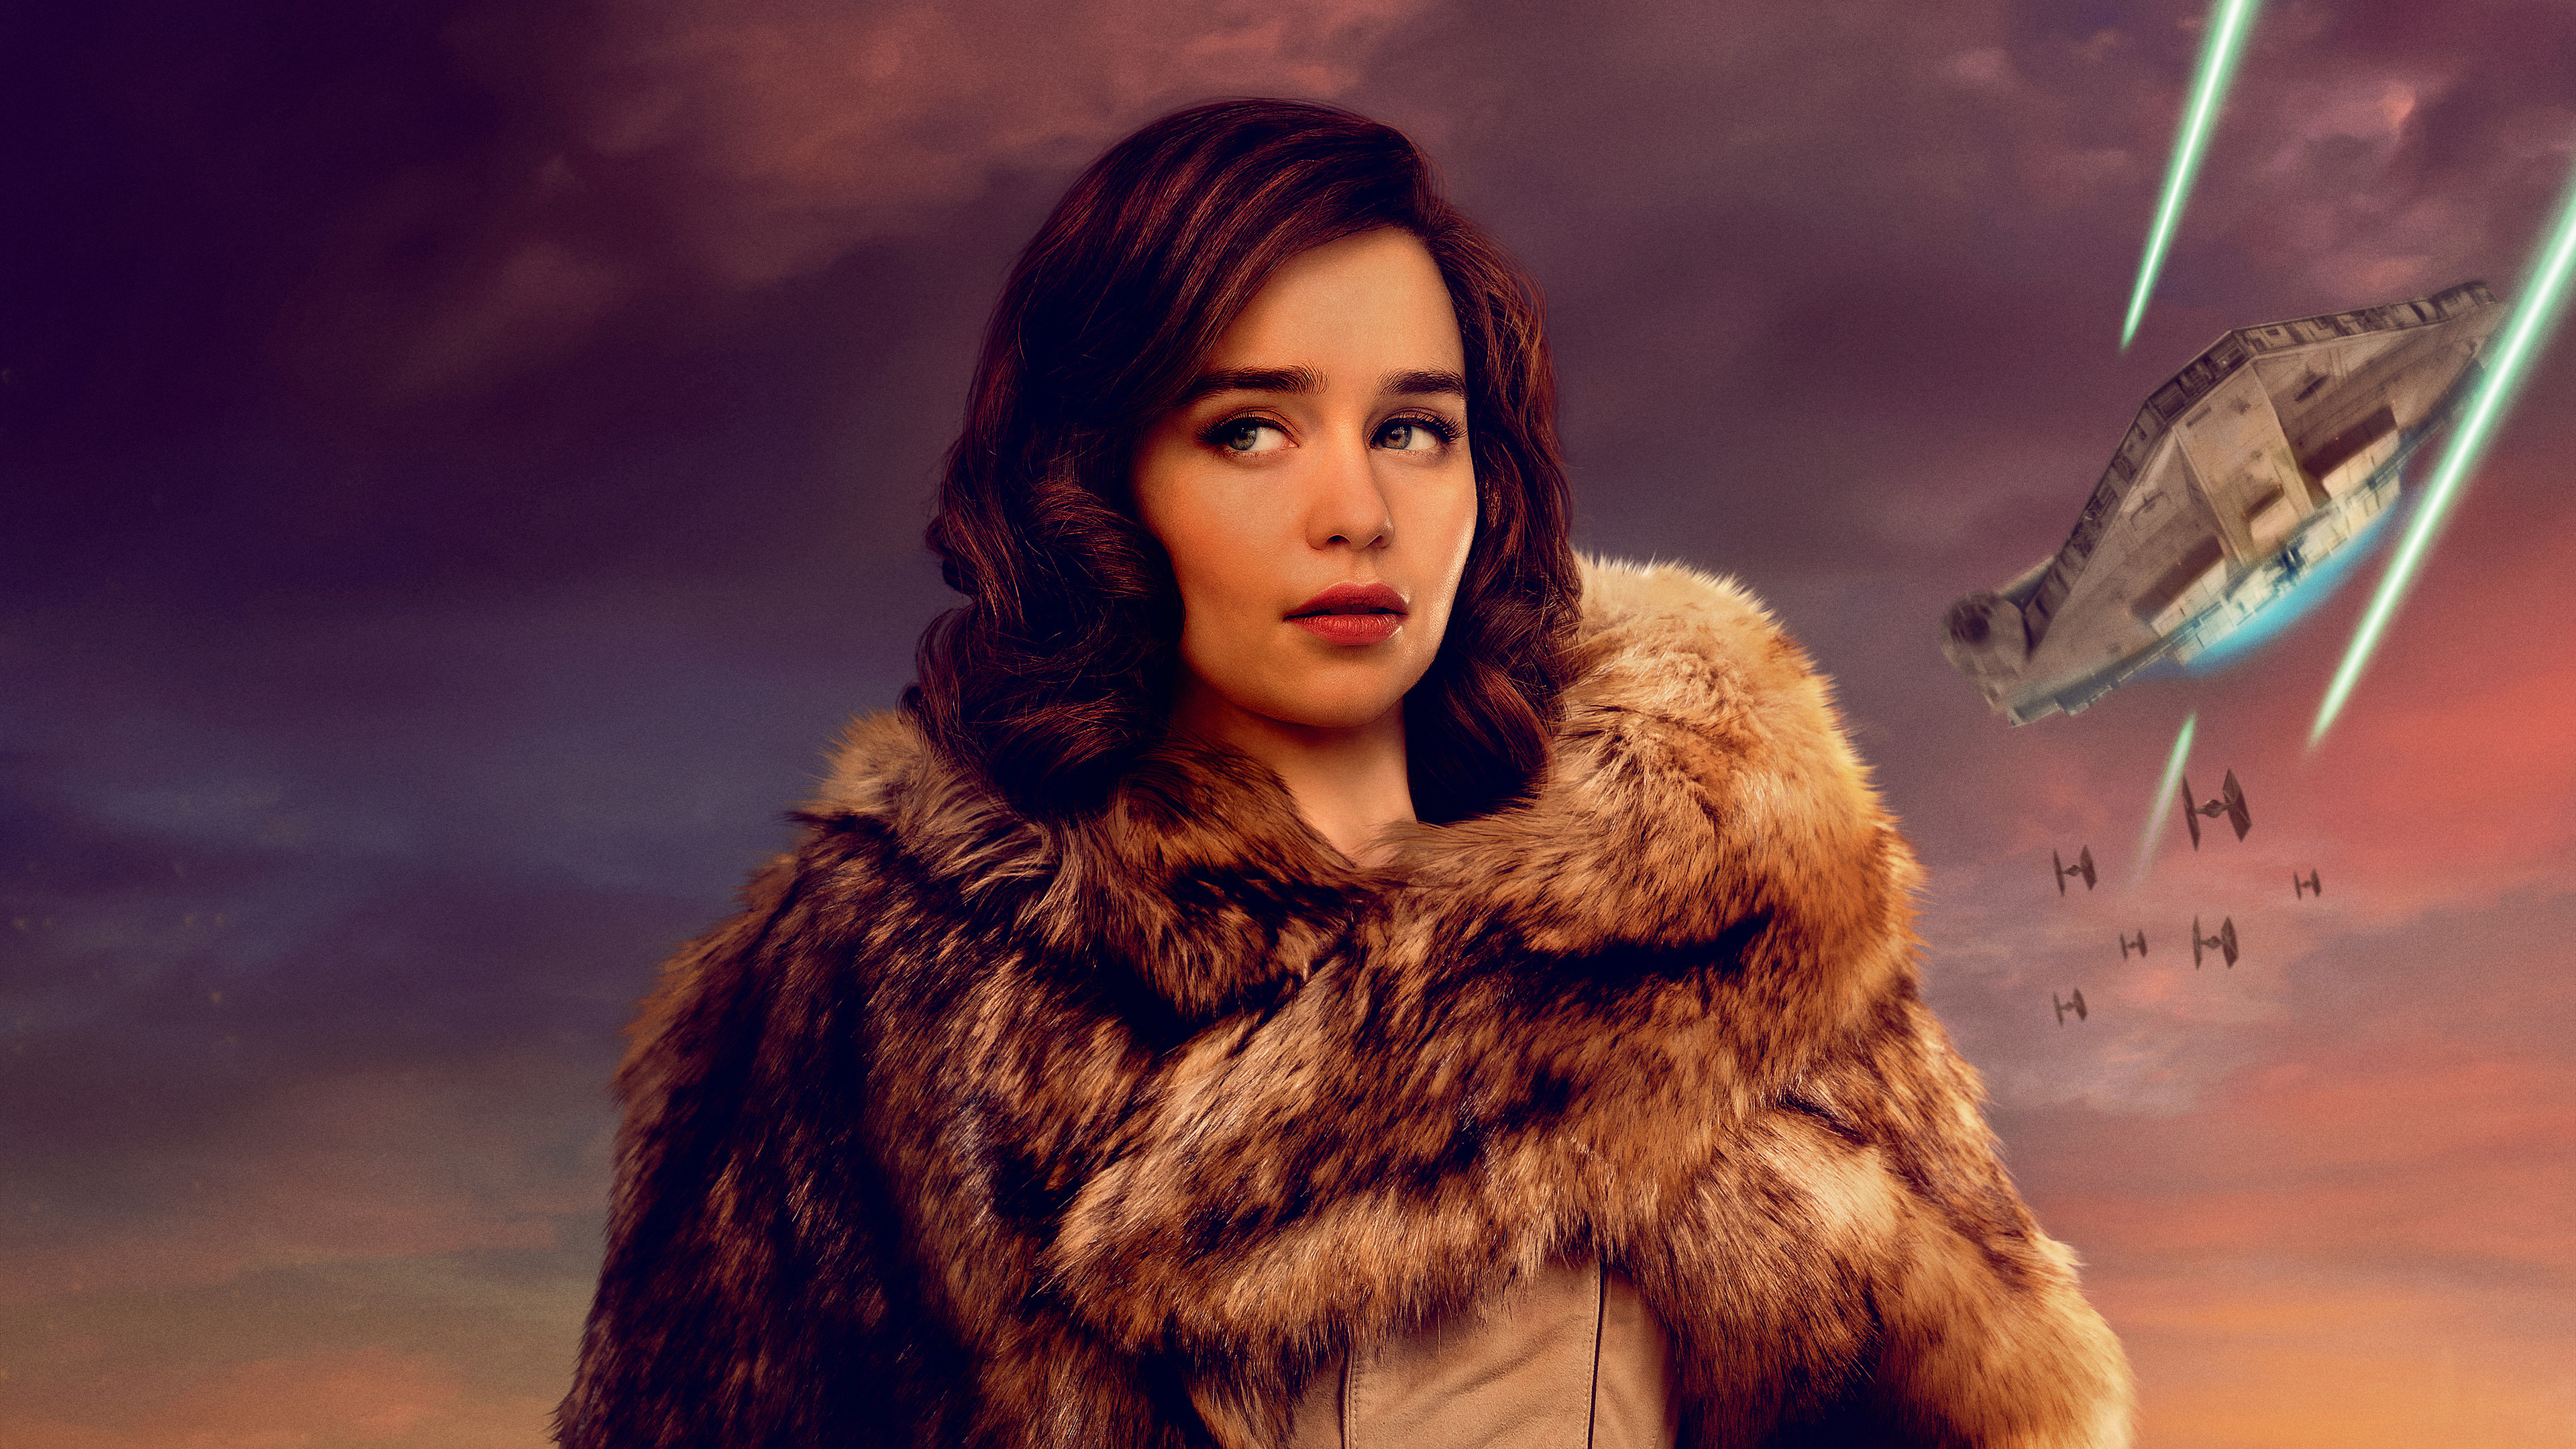 qira in solo a star wars story movie 5k 1537645570 - Qira In Solo A Star Wars Story Movie 5k - solo a star wars story wallpapers, movies wallpapers, hd-wallpapers, emilia clarke wallpapers, 5k wallpapers, 4k-wallpapers, 2018-movies-wallpapers